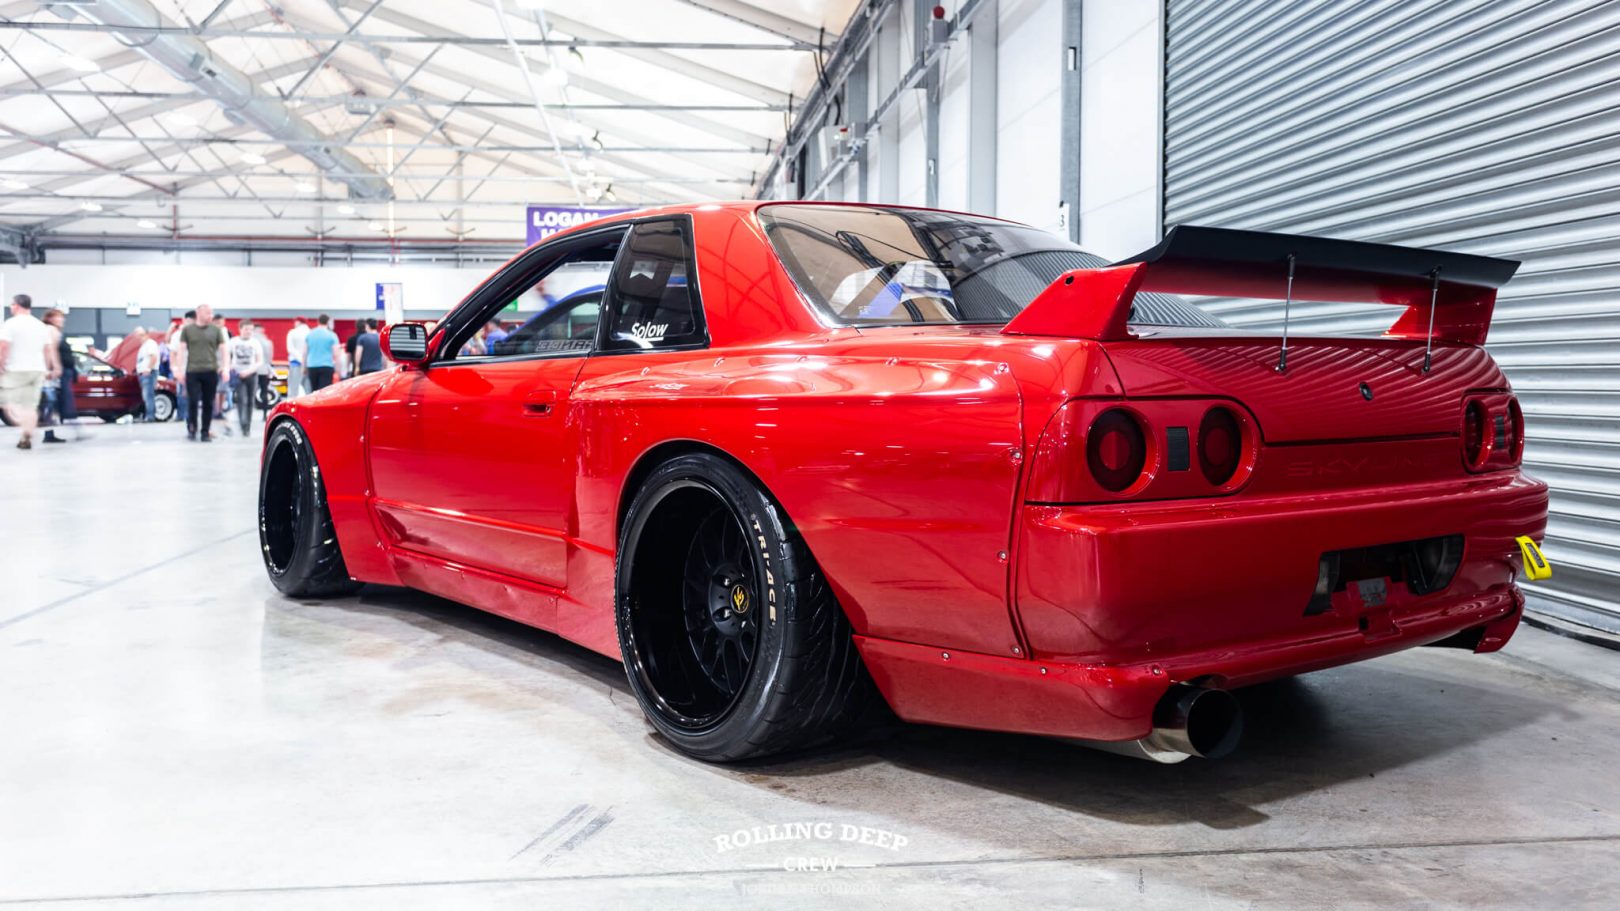 One of the stand out cars for us was a red Nissan R32 with a Pandem wide bo...